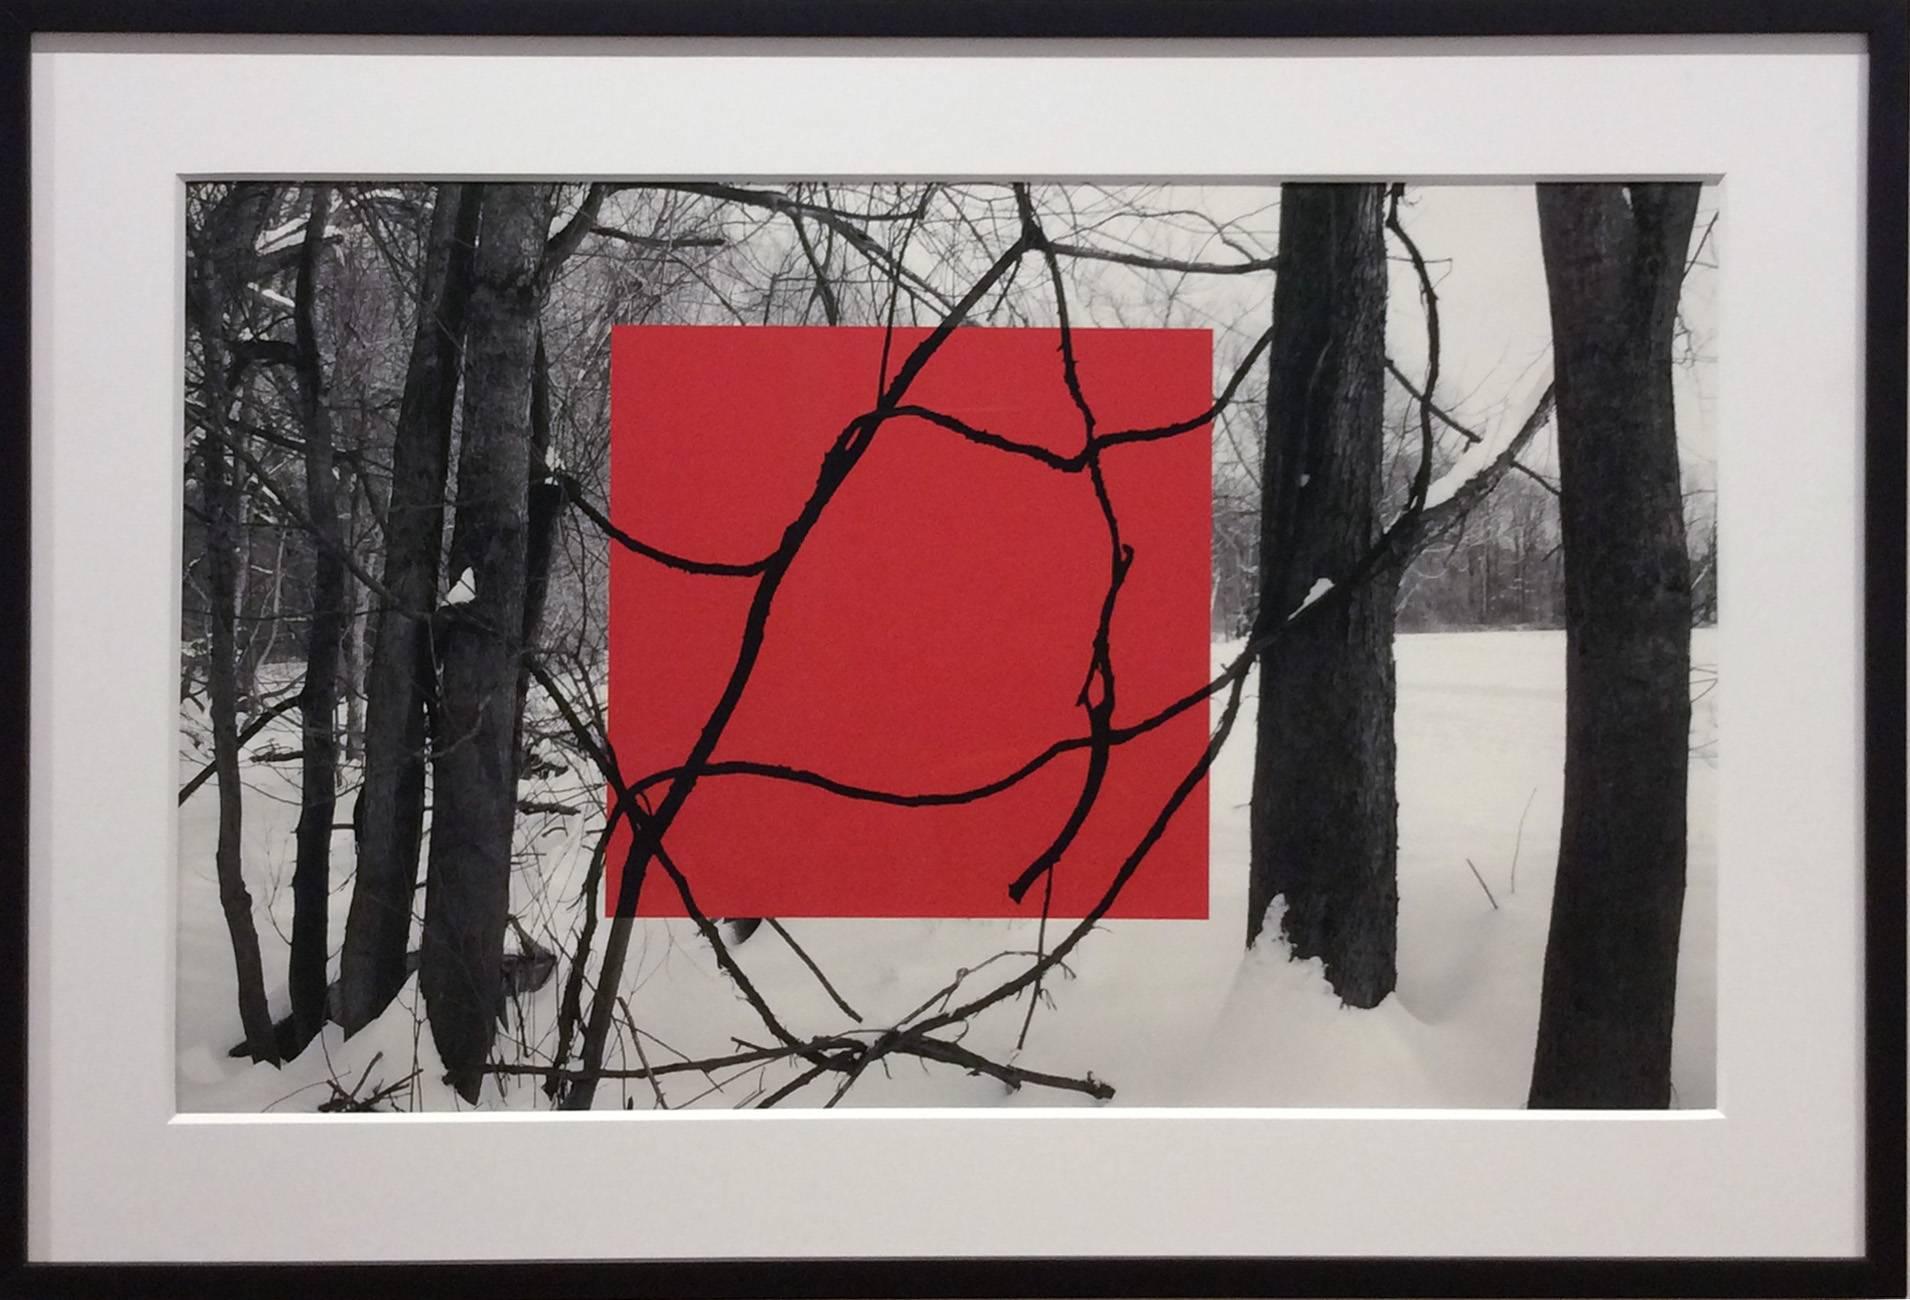 Red Square (Modern Abstract B&W Gestural Tree Outlines with Graphic Red Square) - Photograph by Stephanie Blumenthal